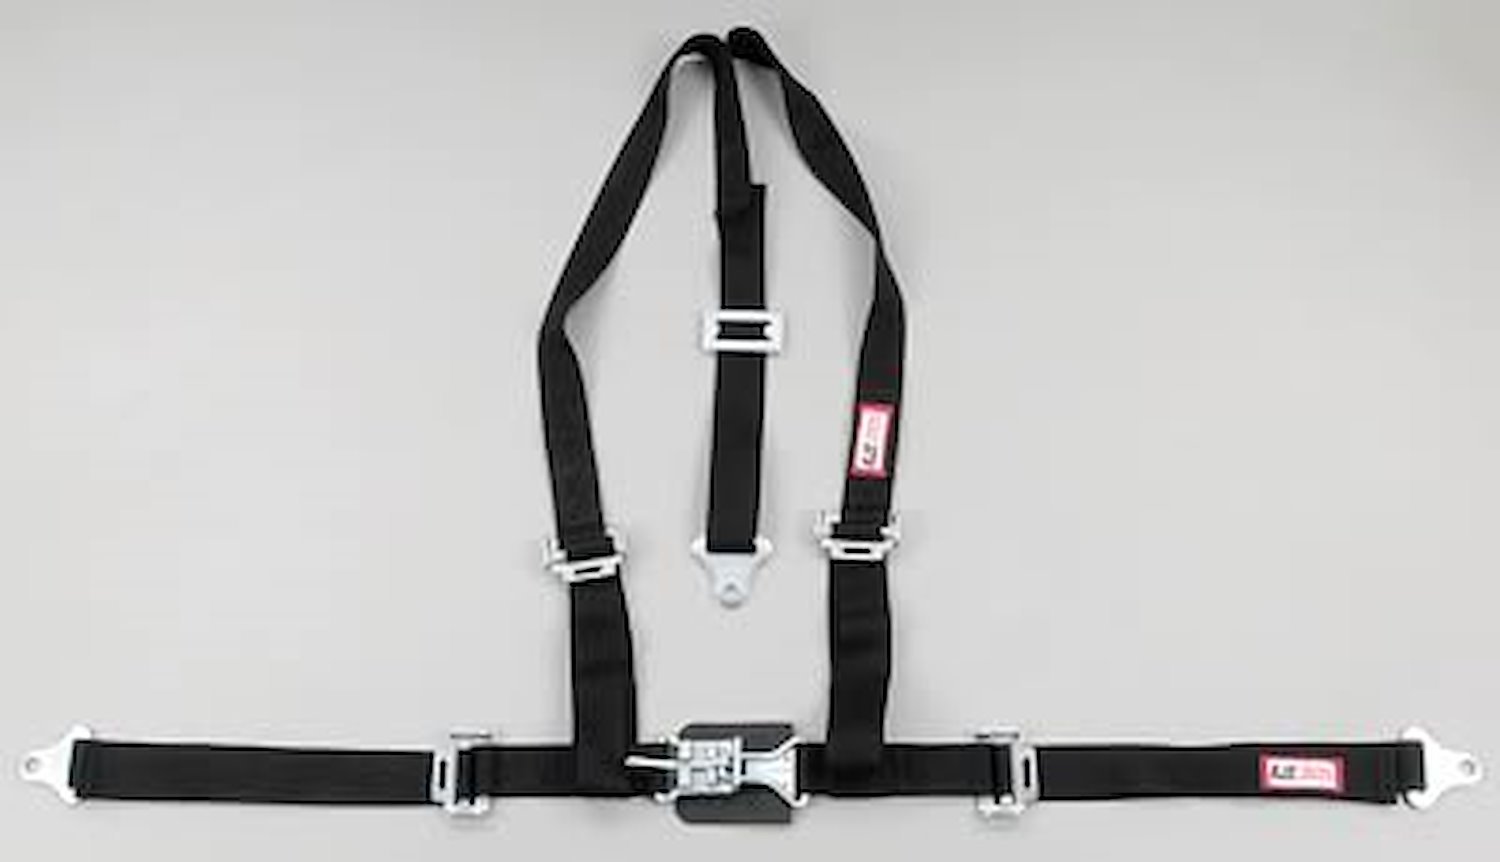 NON-SFI L&L HARNESS 3 PULL UP Lap Belt SEWN IN 2 Shoulder Harness V ROLL BAR Mount w/STERNUM STRAP ALL SNAP ENDS YELLOW